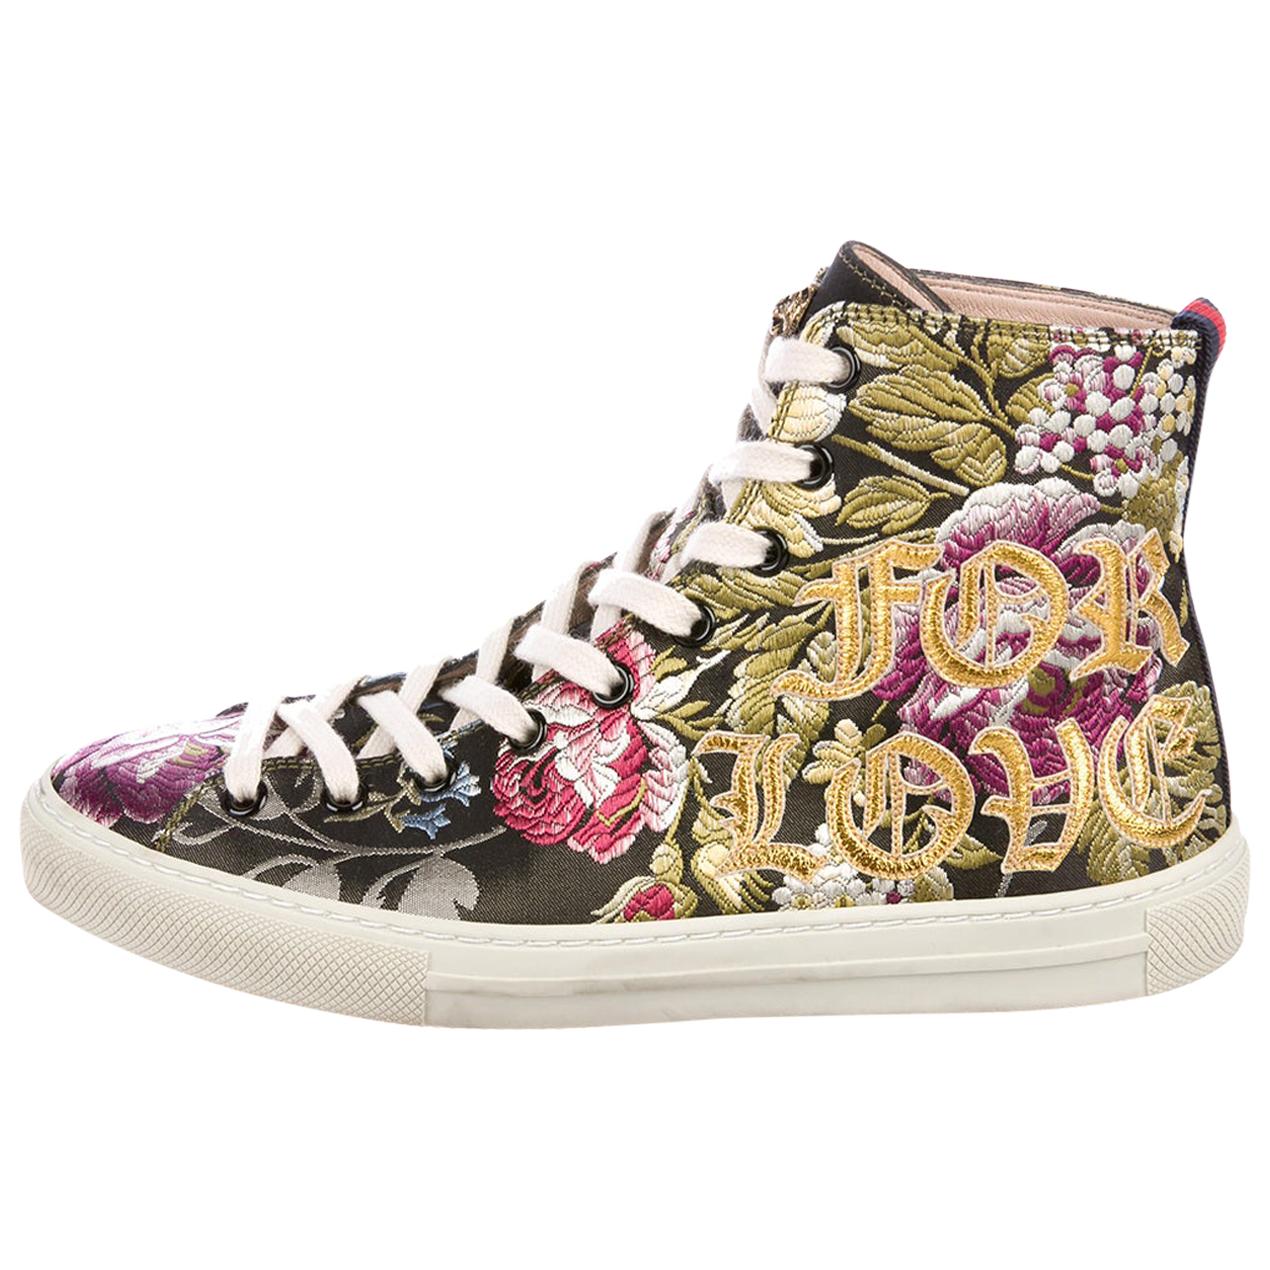 Gucci Blind For Love Floral-Embroidered High-Top Sneakers